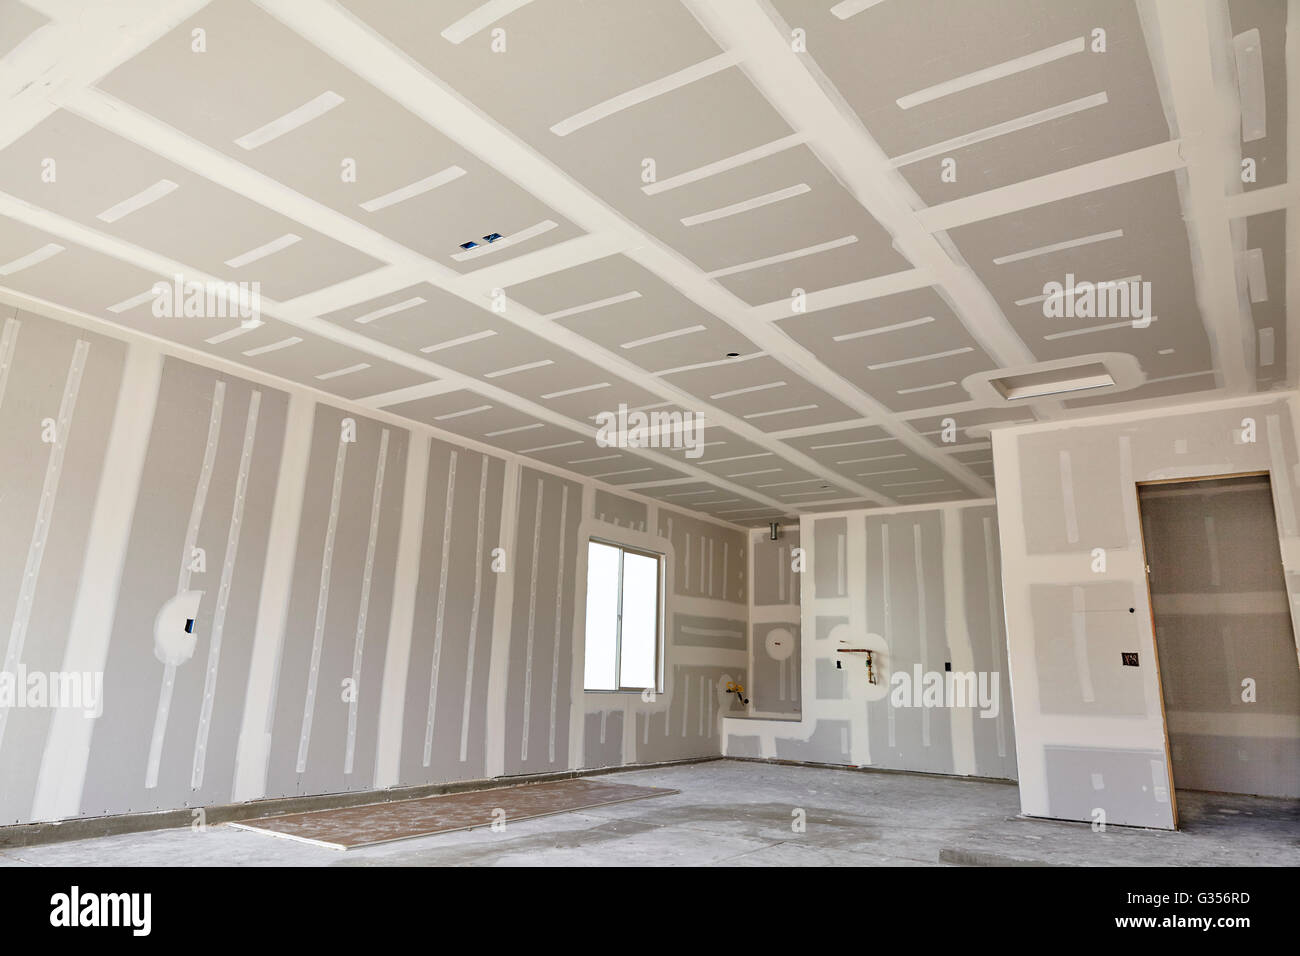 Construction building industry new home construction interior drywall tape and finish details Stock Photo